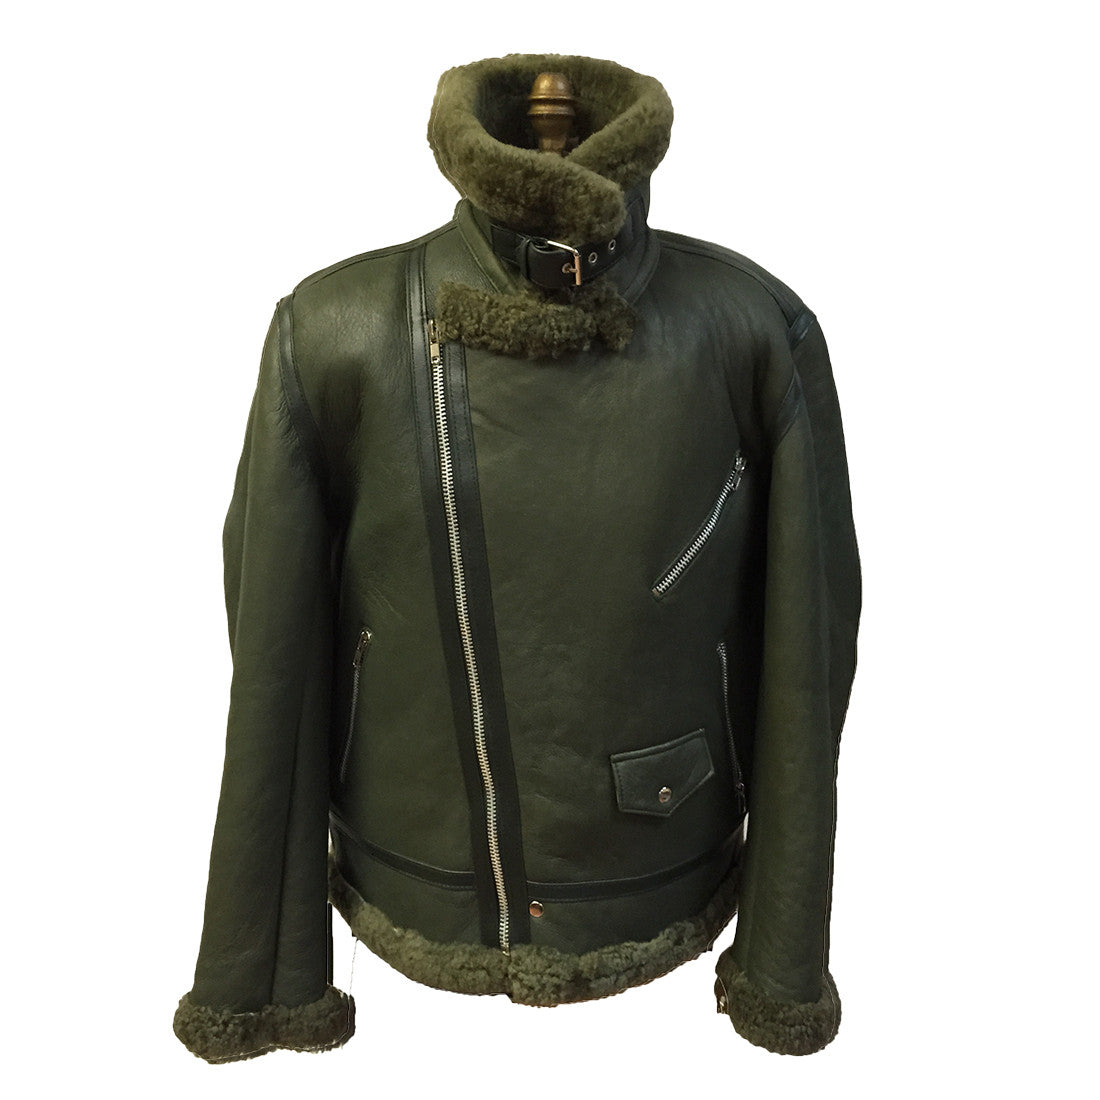 Jakewood - Shearling & Cow Racing Aviator Jacket - Dudes Boutique